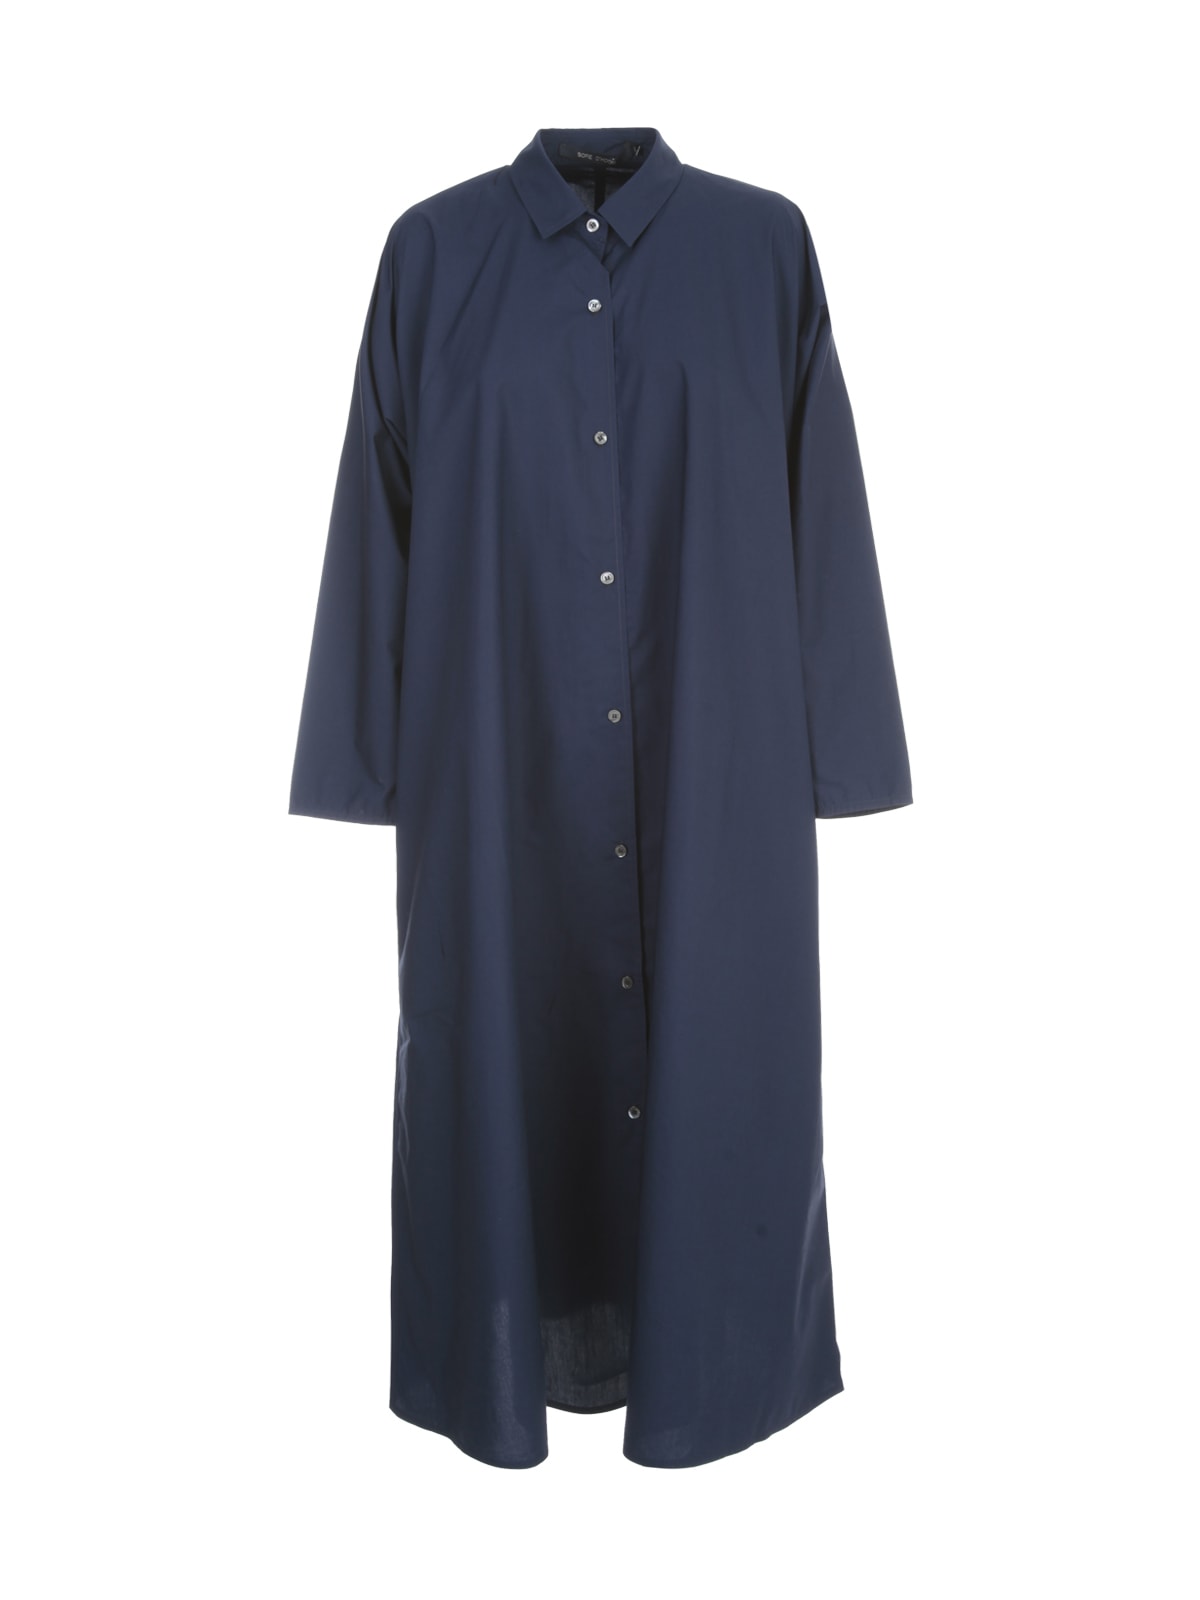 Sofie dHoore Fully Buttoned Shirt Dress